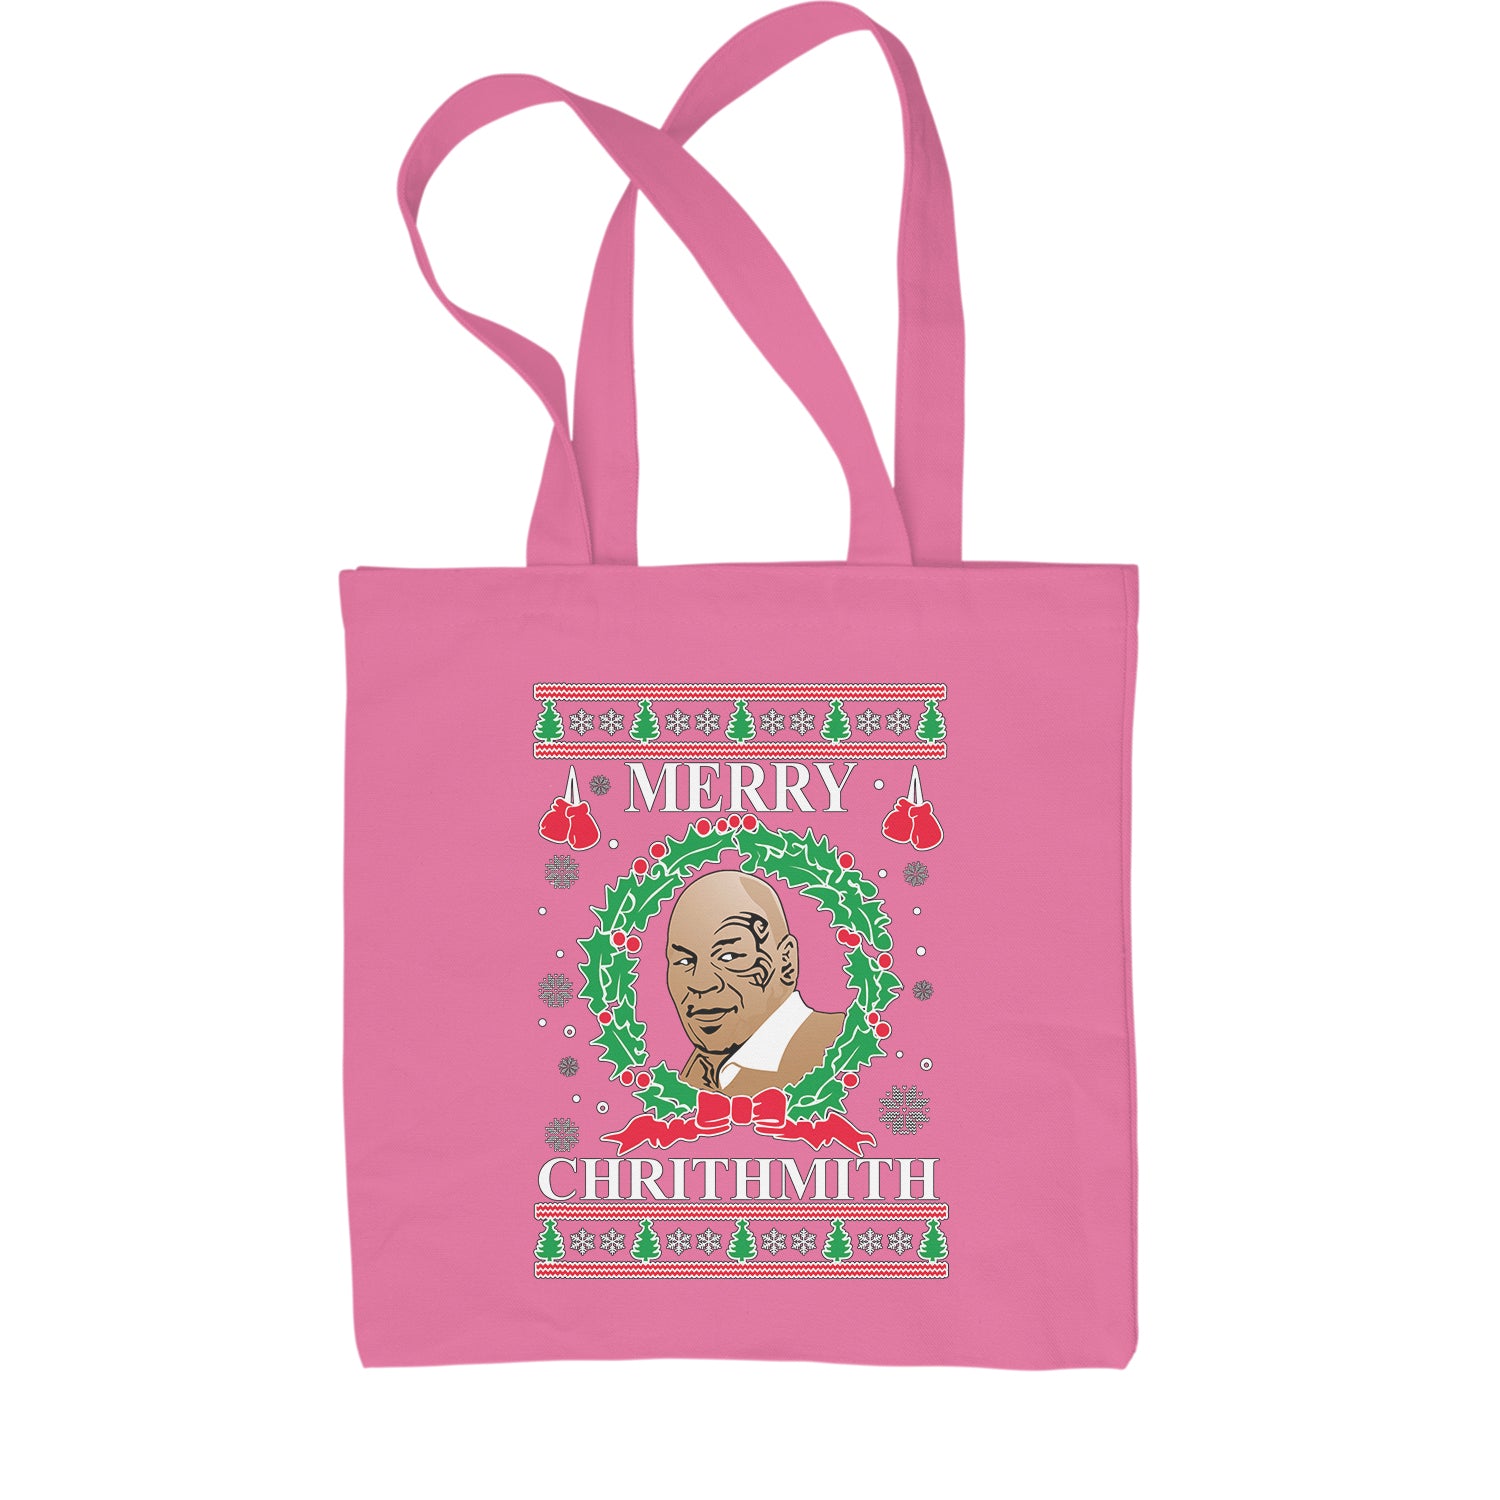 Merry Chrithmith Ugly Christmas Shopping Tote Bag christmas, holiday, michael, mike, sweater, tyson, ugly by Expression Tees